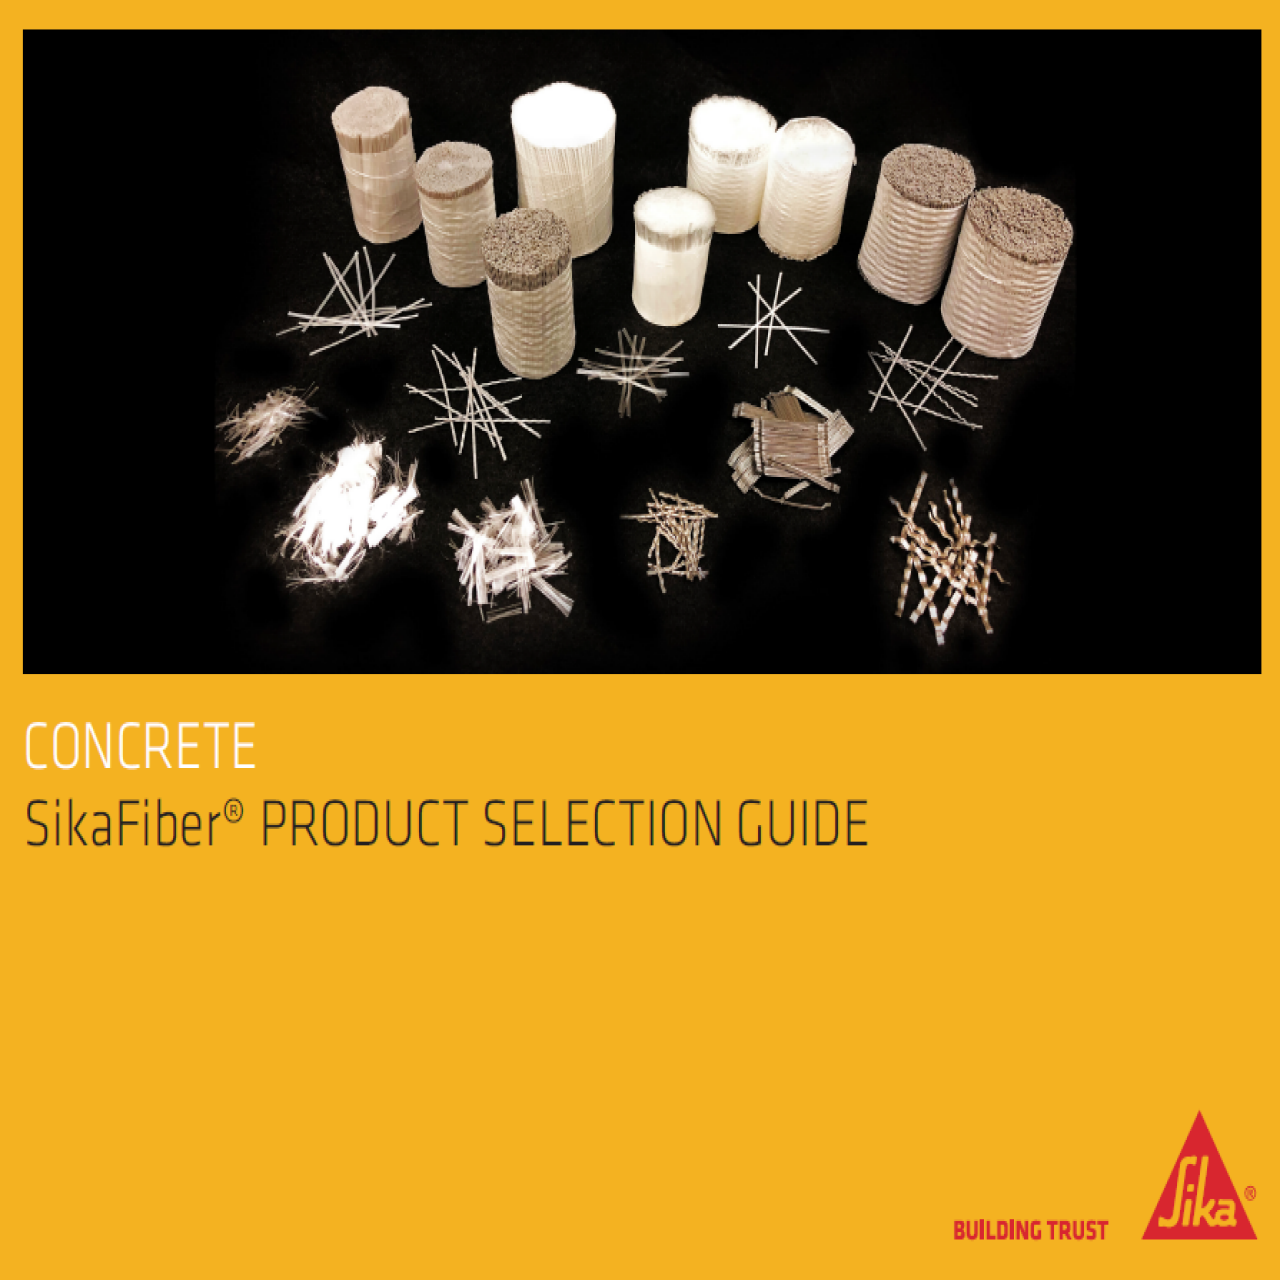 SikaFiber Product Guide